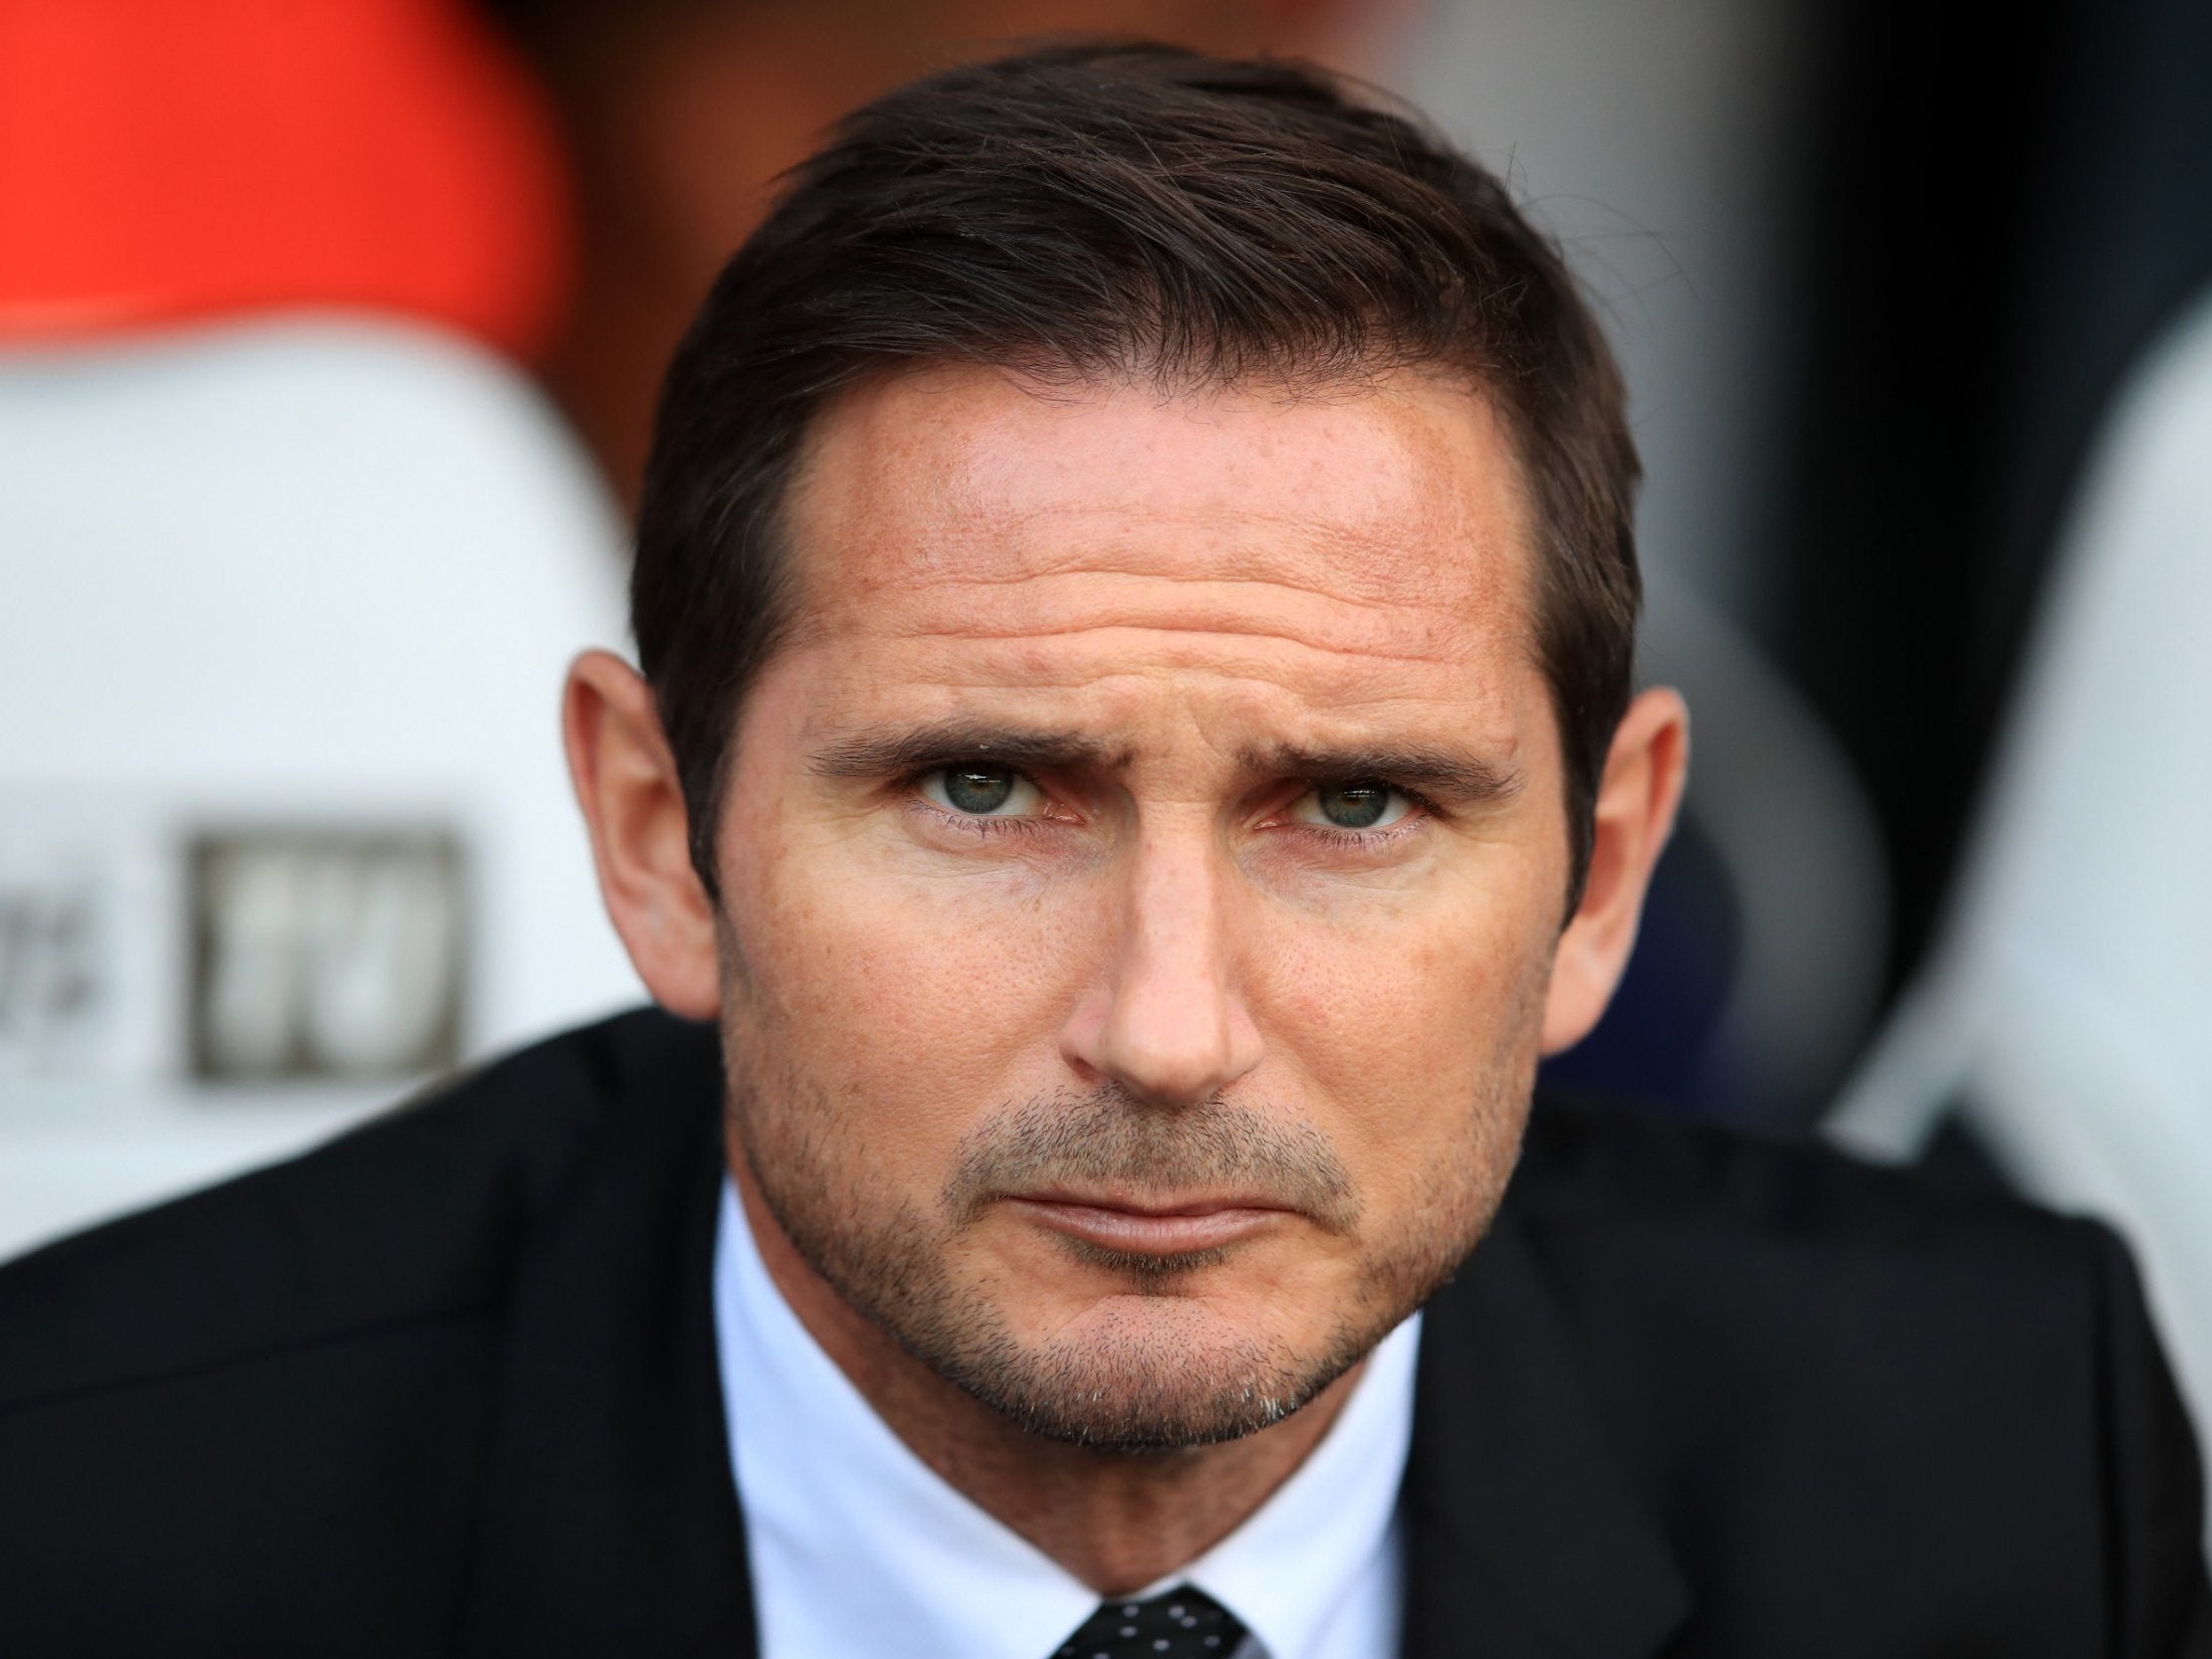 Frank Lampard has made a positive start in charge of Derby